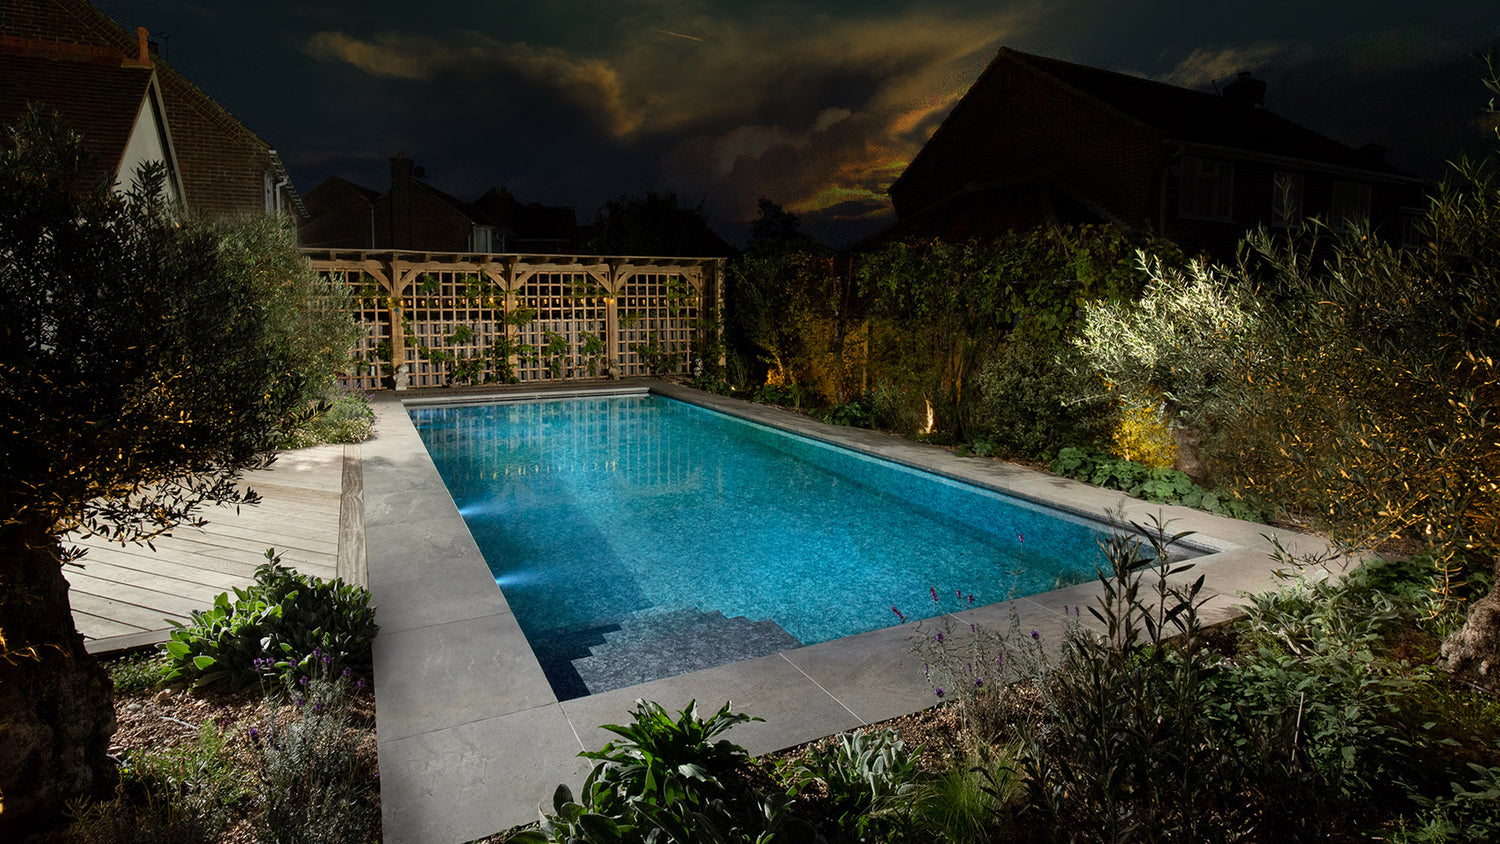 A swimming pool at night. Blue water with grey coping stones around. A fence at the back and lots of garden foliage around.